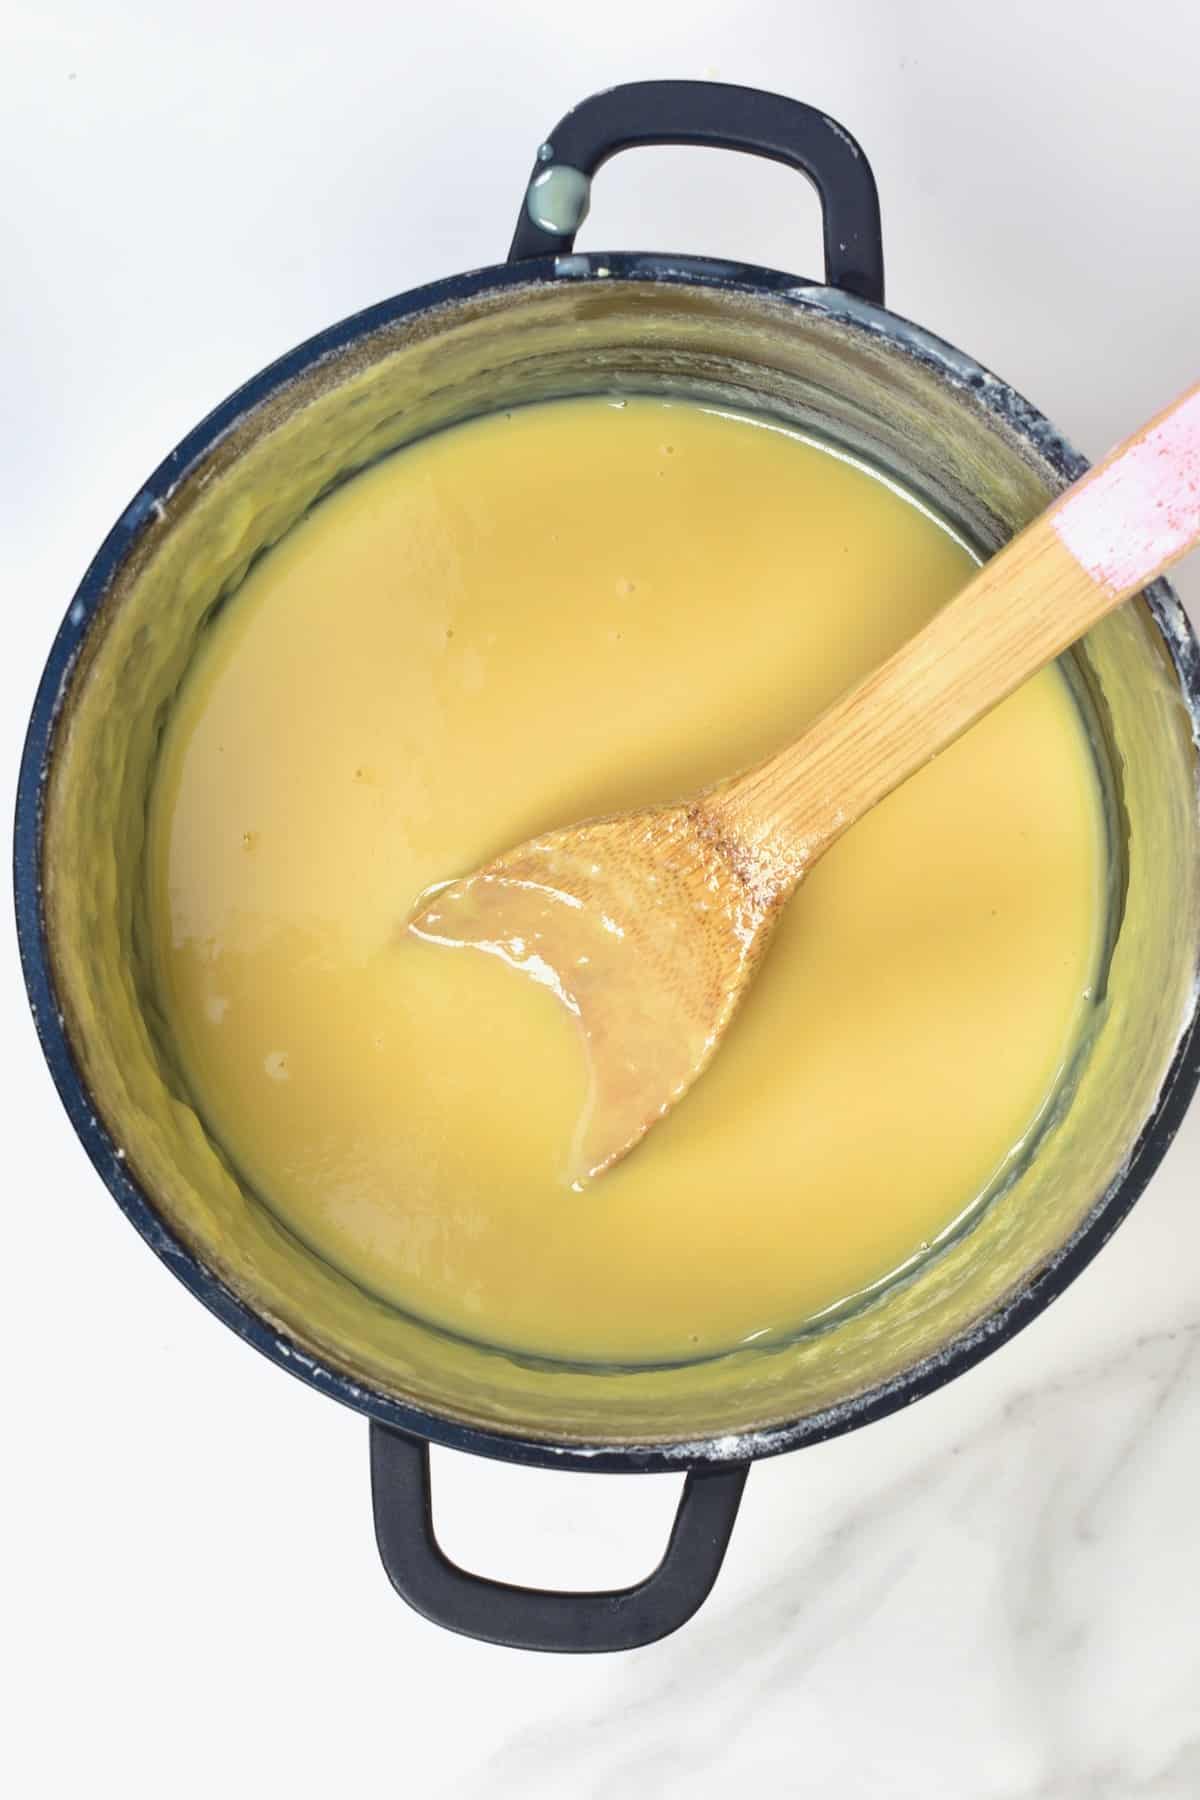 Homemade condensed milk in a pot